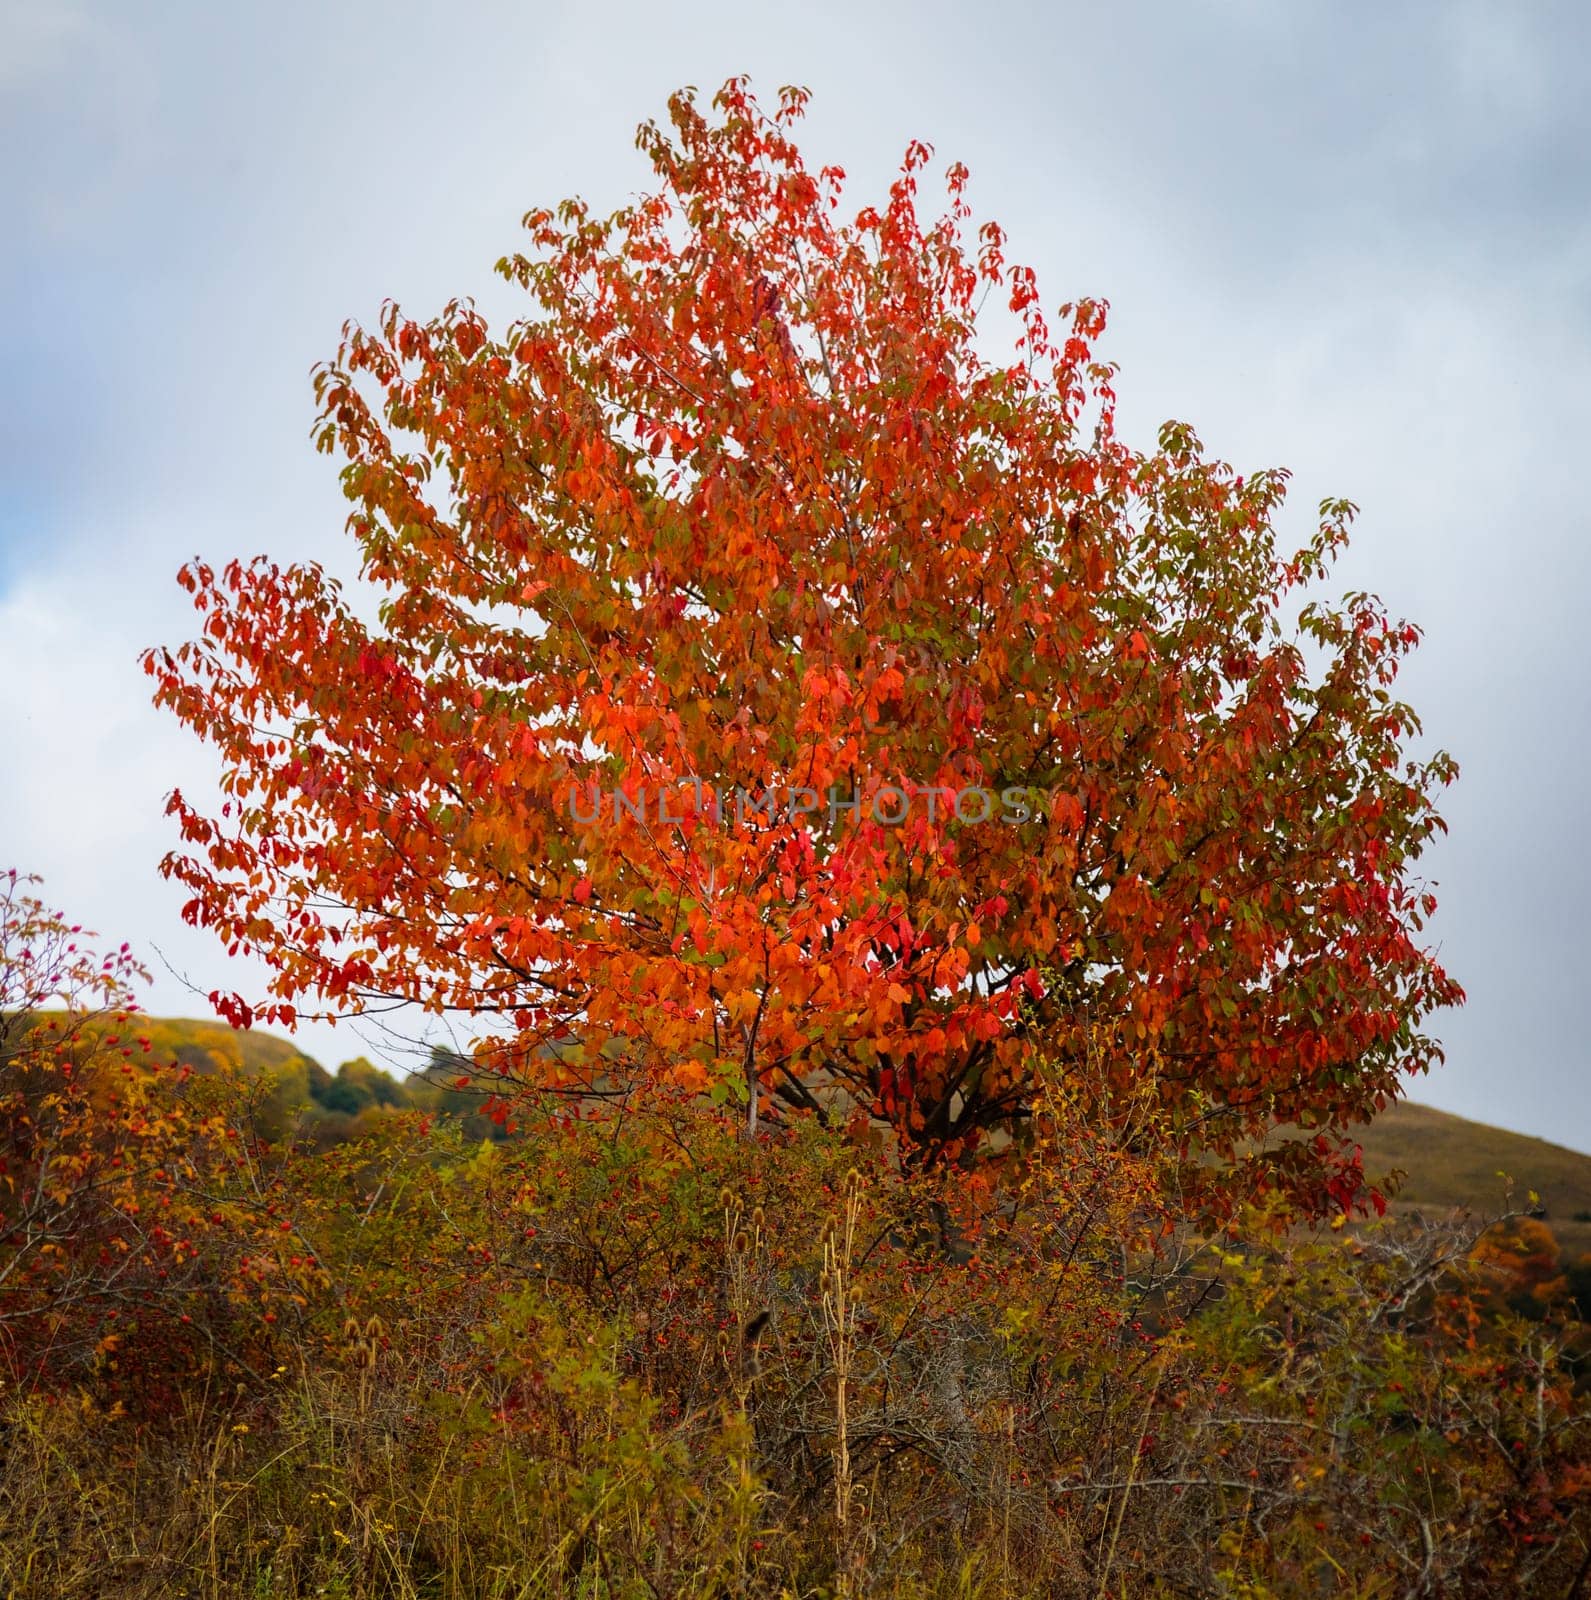 A bright autumn tree in all its glory